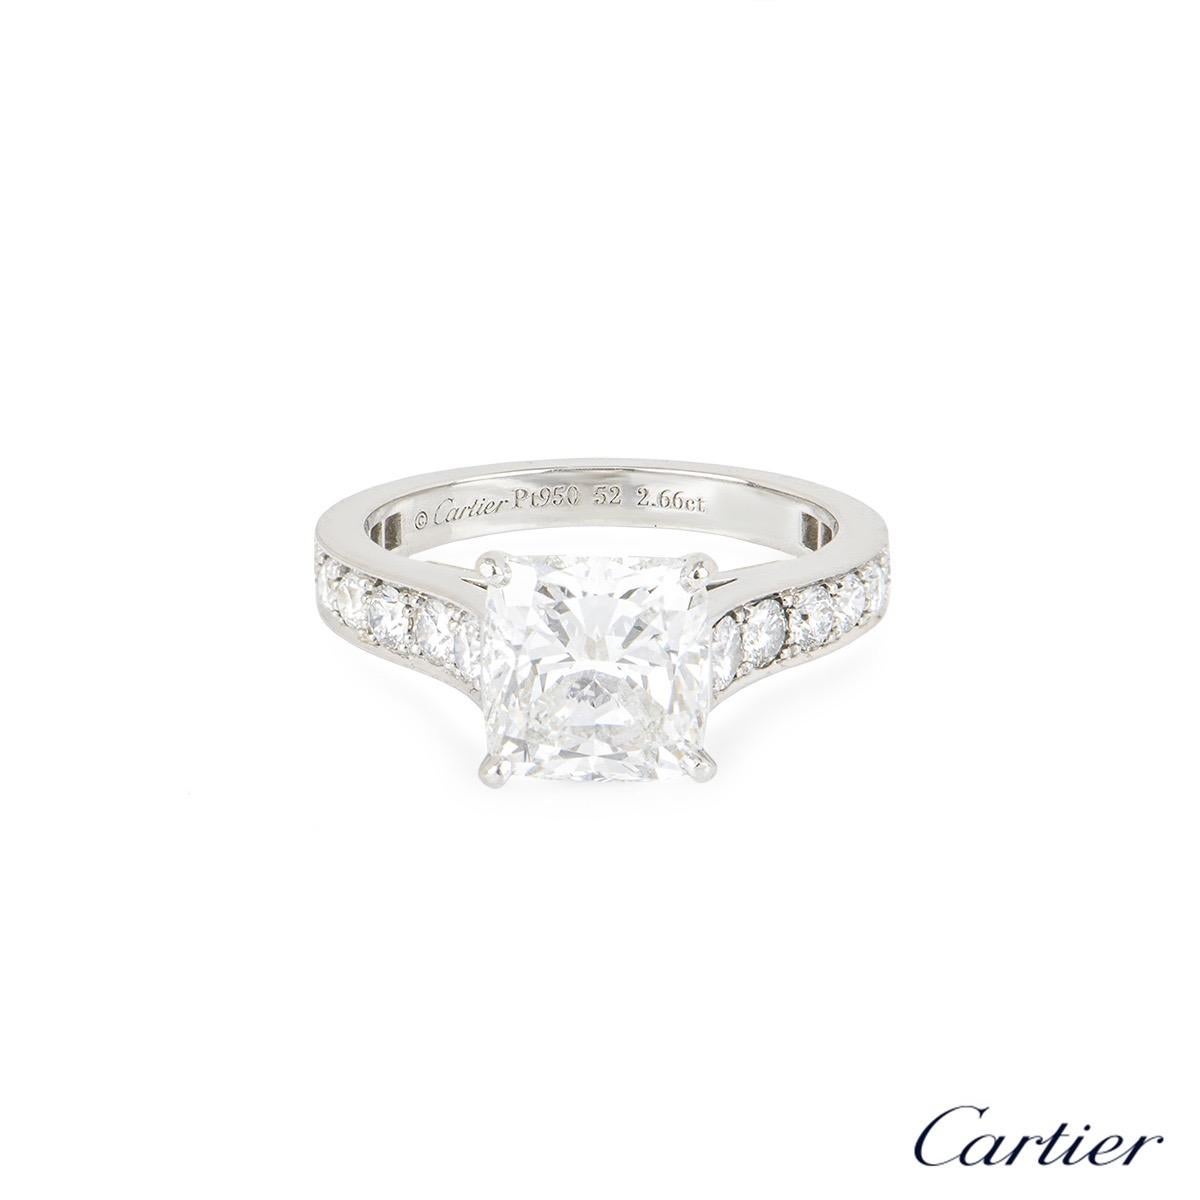 A stunning platinum Cartier diamond engagement ring from the 1895 solitaire collection. The ring comprises of a cushion cut diamond in a four claw setting with a weight of 2.66ct, E colour and VS1 clarity. There are 18 round brilliant cut diamonds